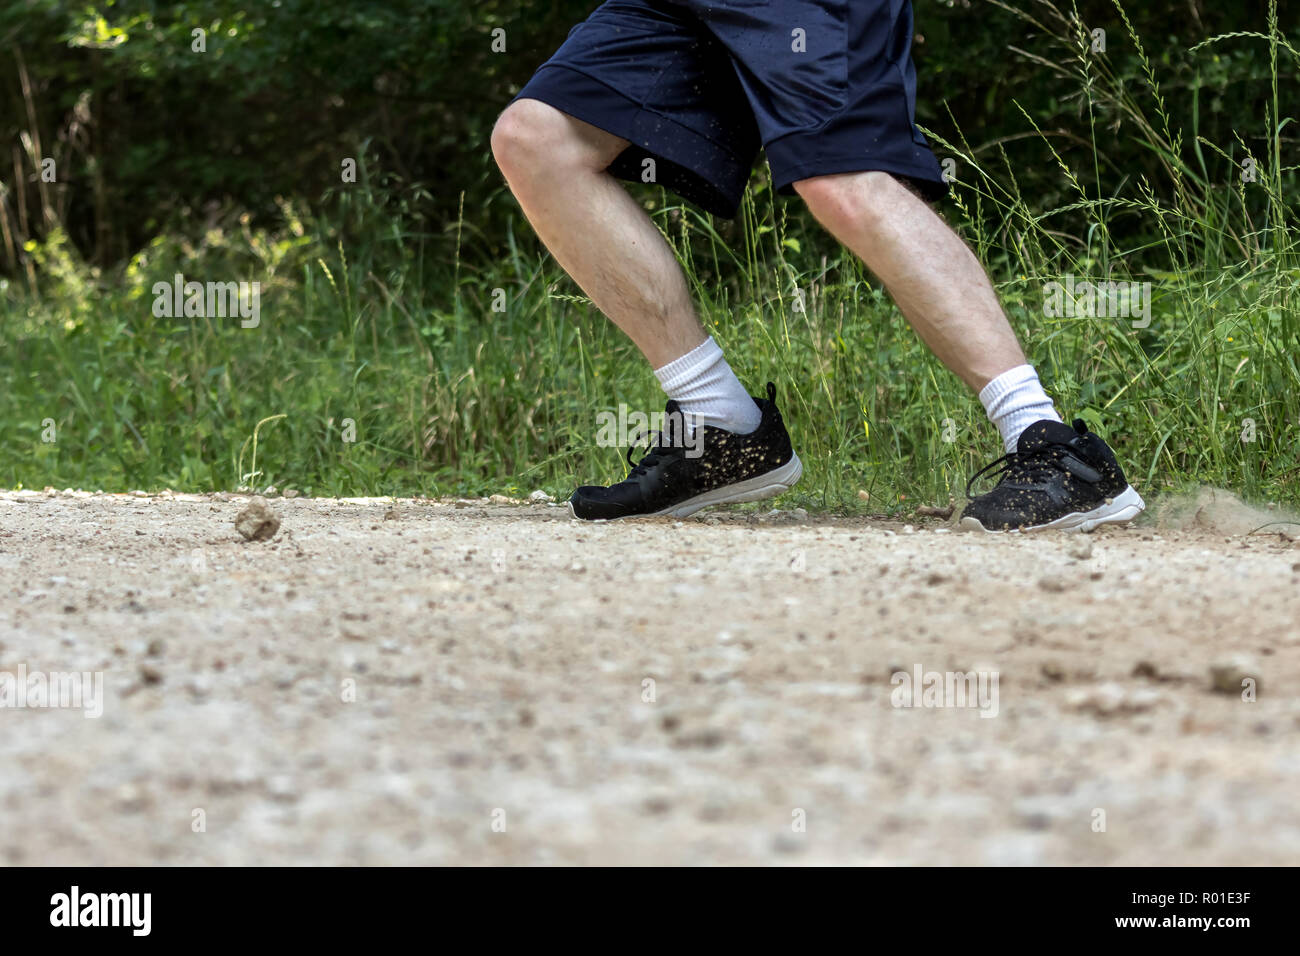 A man runs on a dirt path and kicks up dirt and rocks with his shoes. Stock Photo